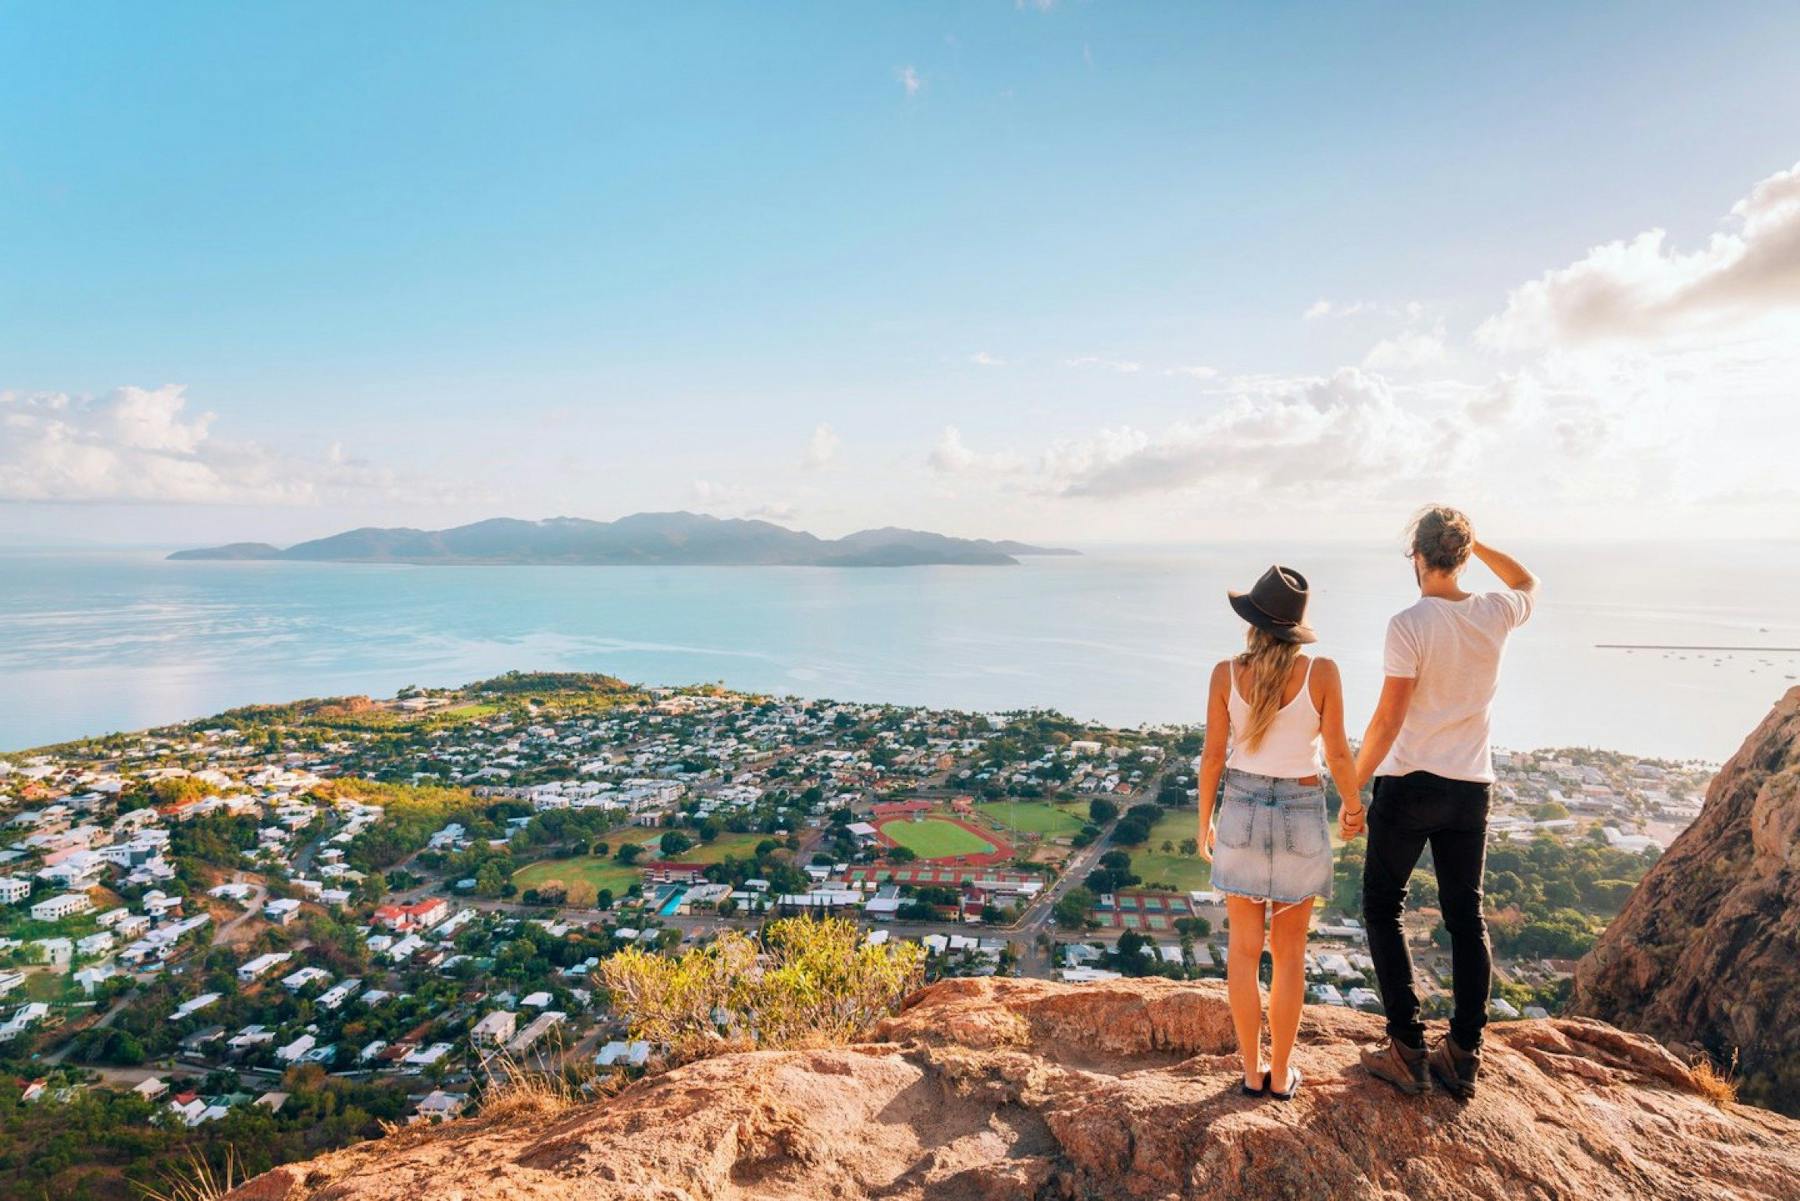 Two people on a hill looking out over a body of water